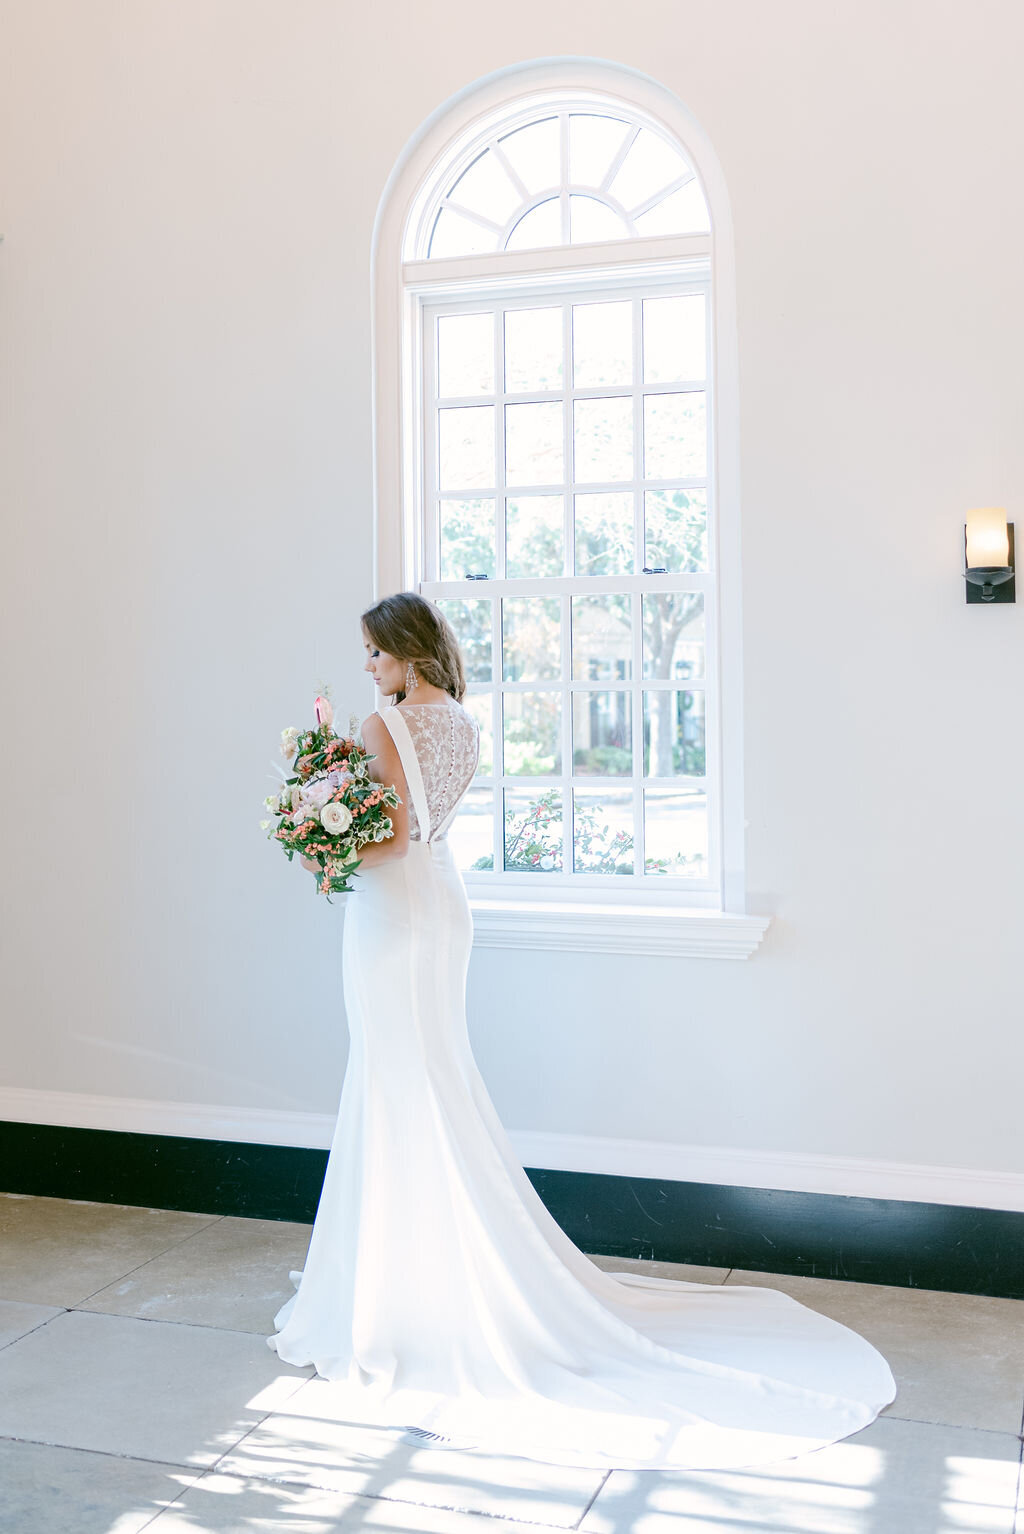 This fit-and-flare wedding gown by Edith Elan features a crepe chapel-length train.